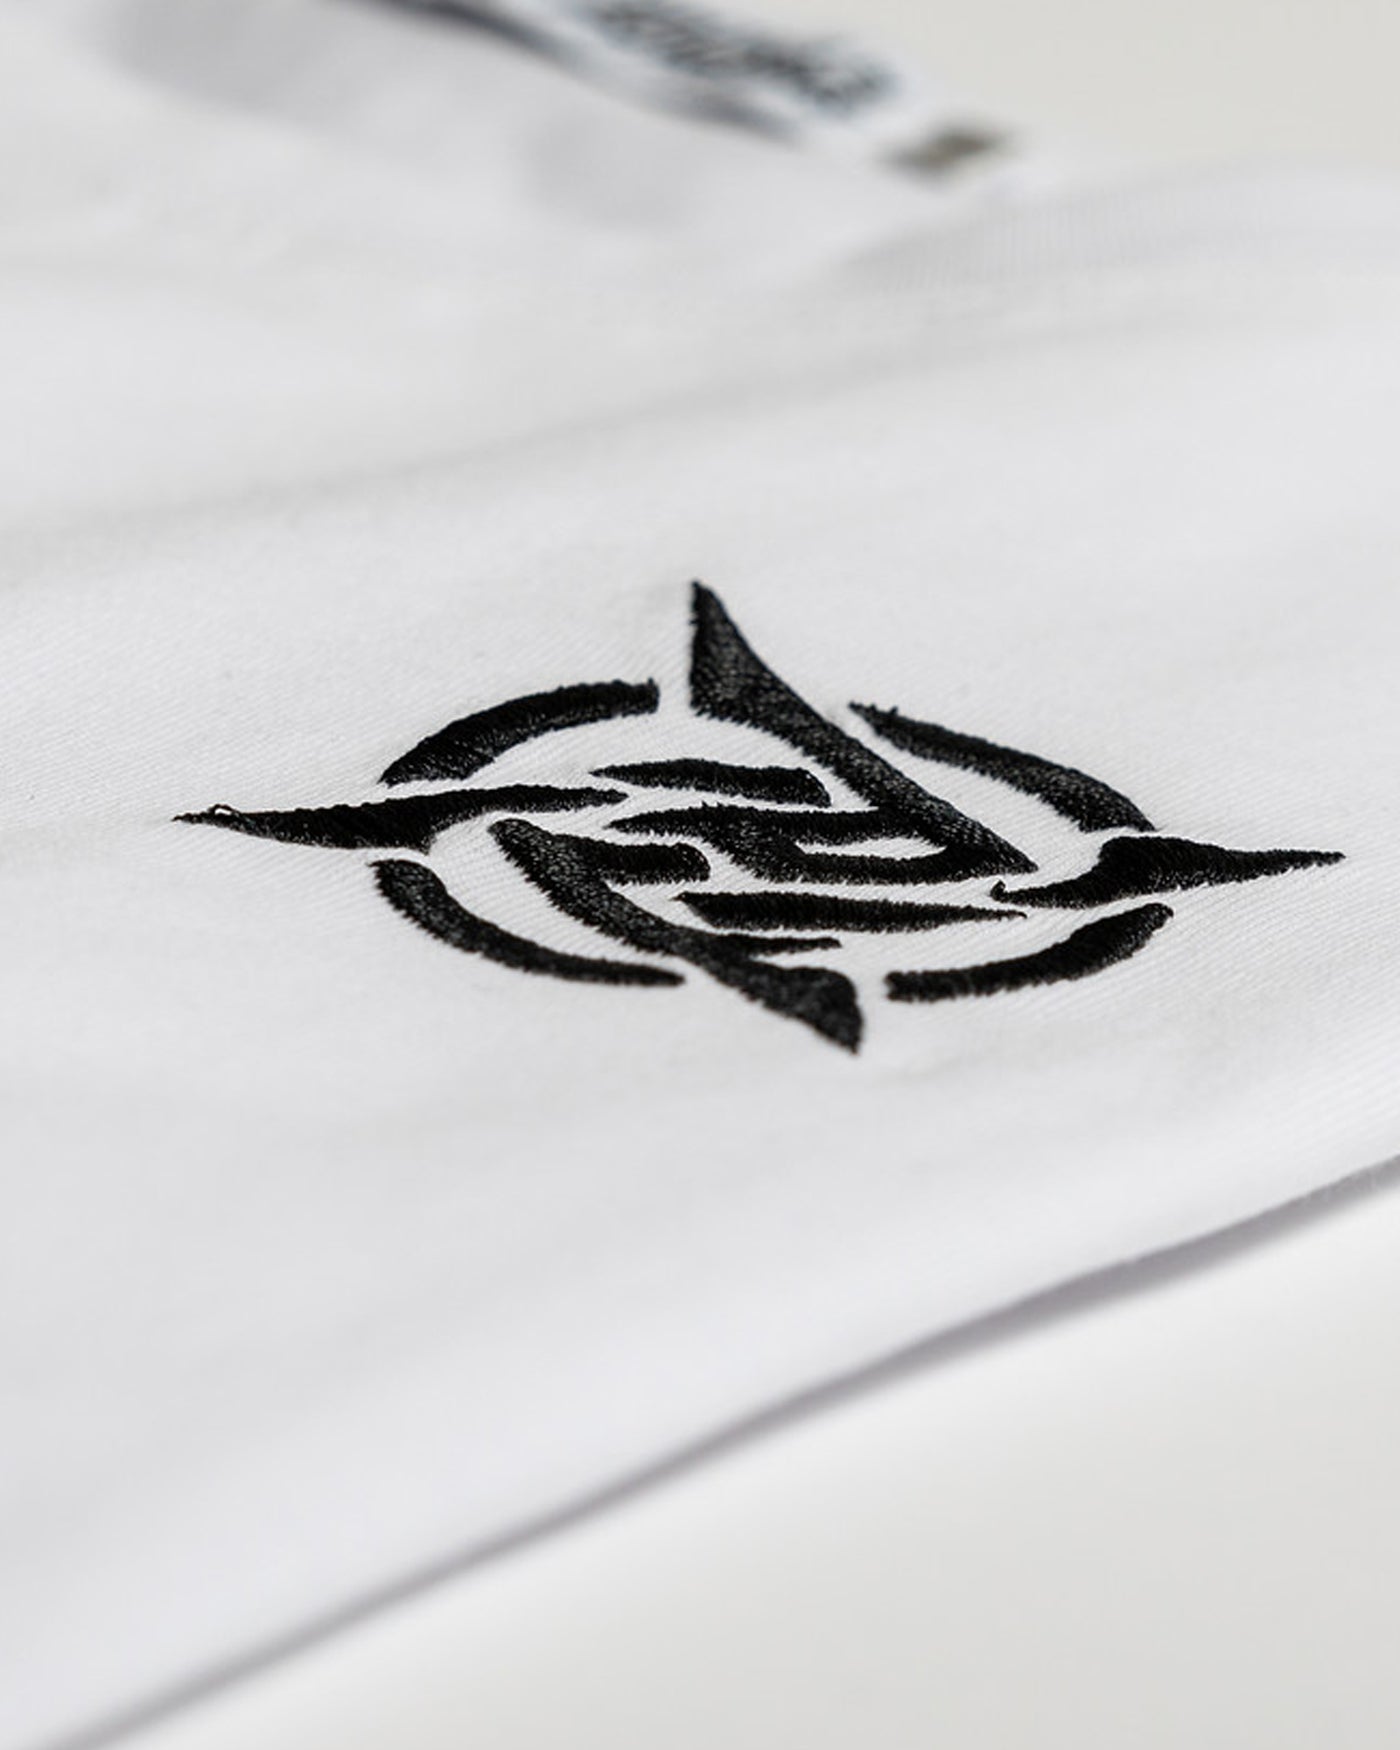 Lagom Collection - White T-shirt from Ninjas in Pyjamas Shop. An image displaying a white t-shirt from the Lagom Collection, featuring the Ninjas in Pyjamas logo subtly printed on the chest. This versatile and trendy t-shirt is a wardrobe essential, allowing you to express your passion for esports and NIP in a sleek and comfortable manner.